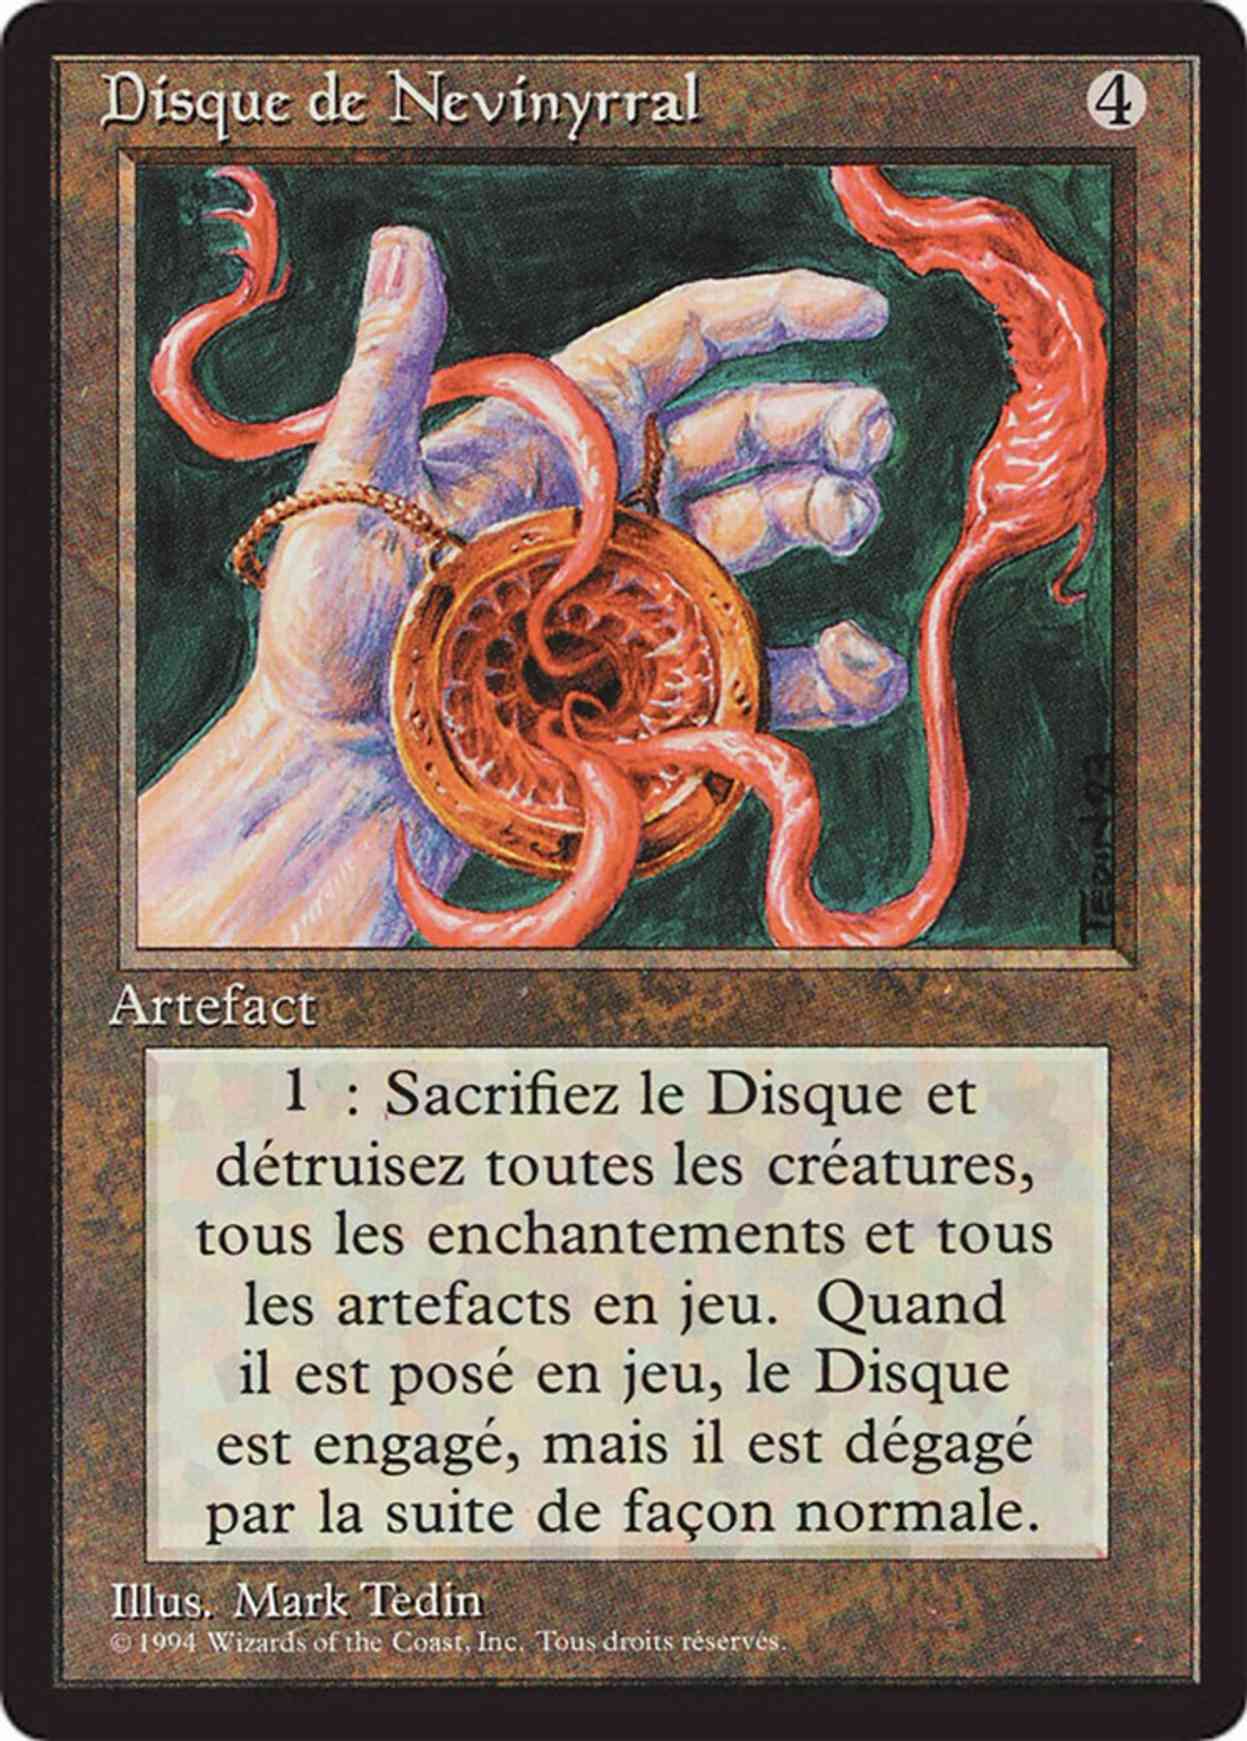 Nevinyrral's Disk magic card front